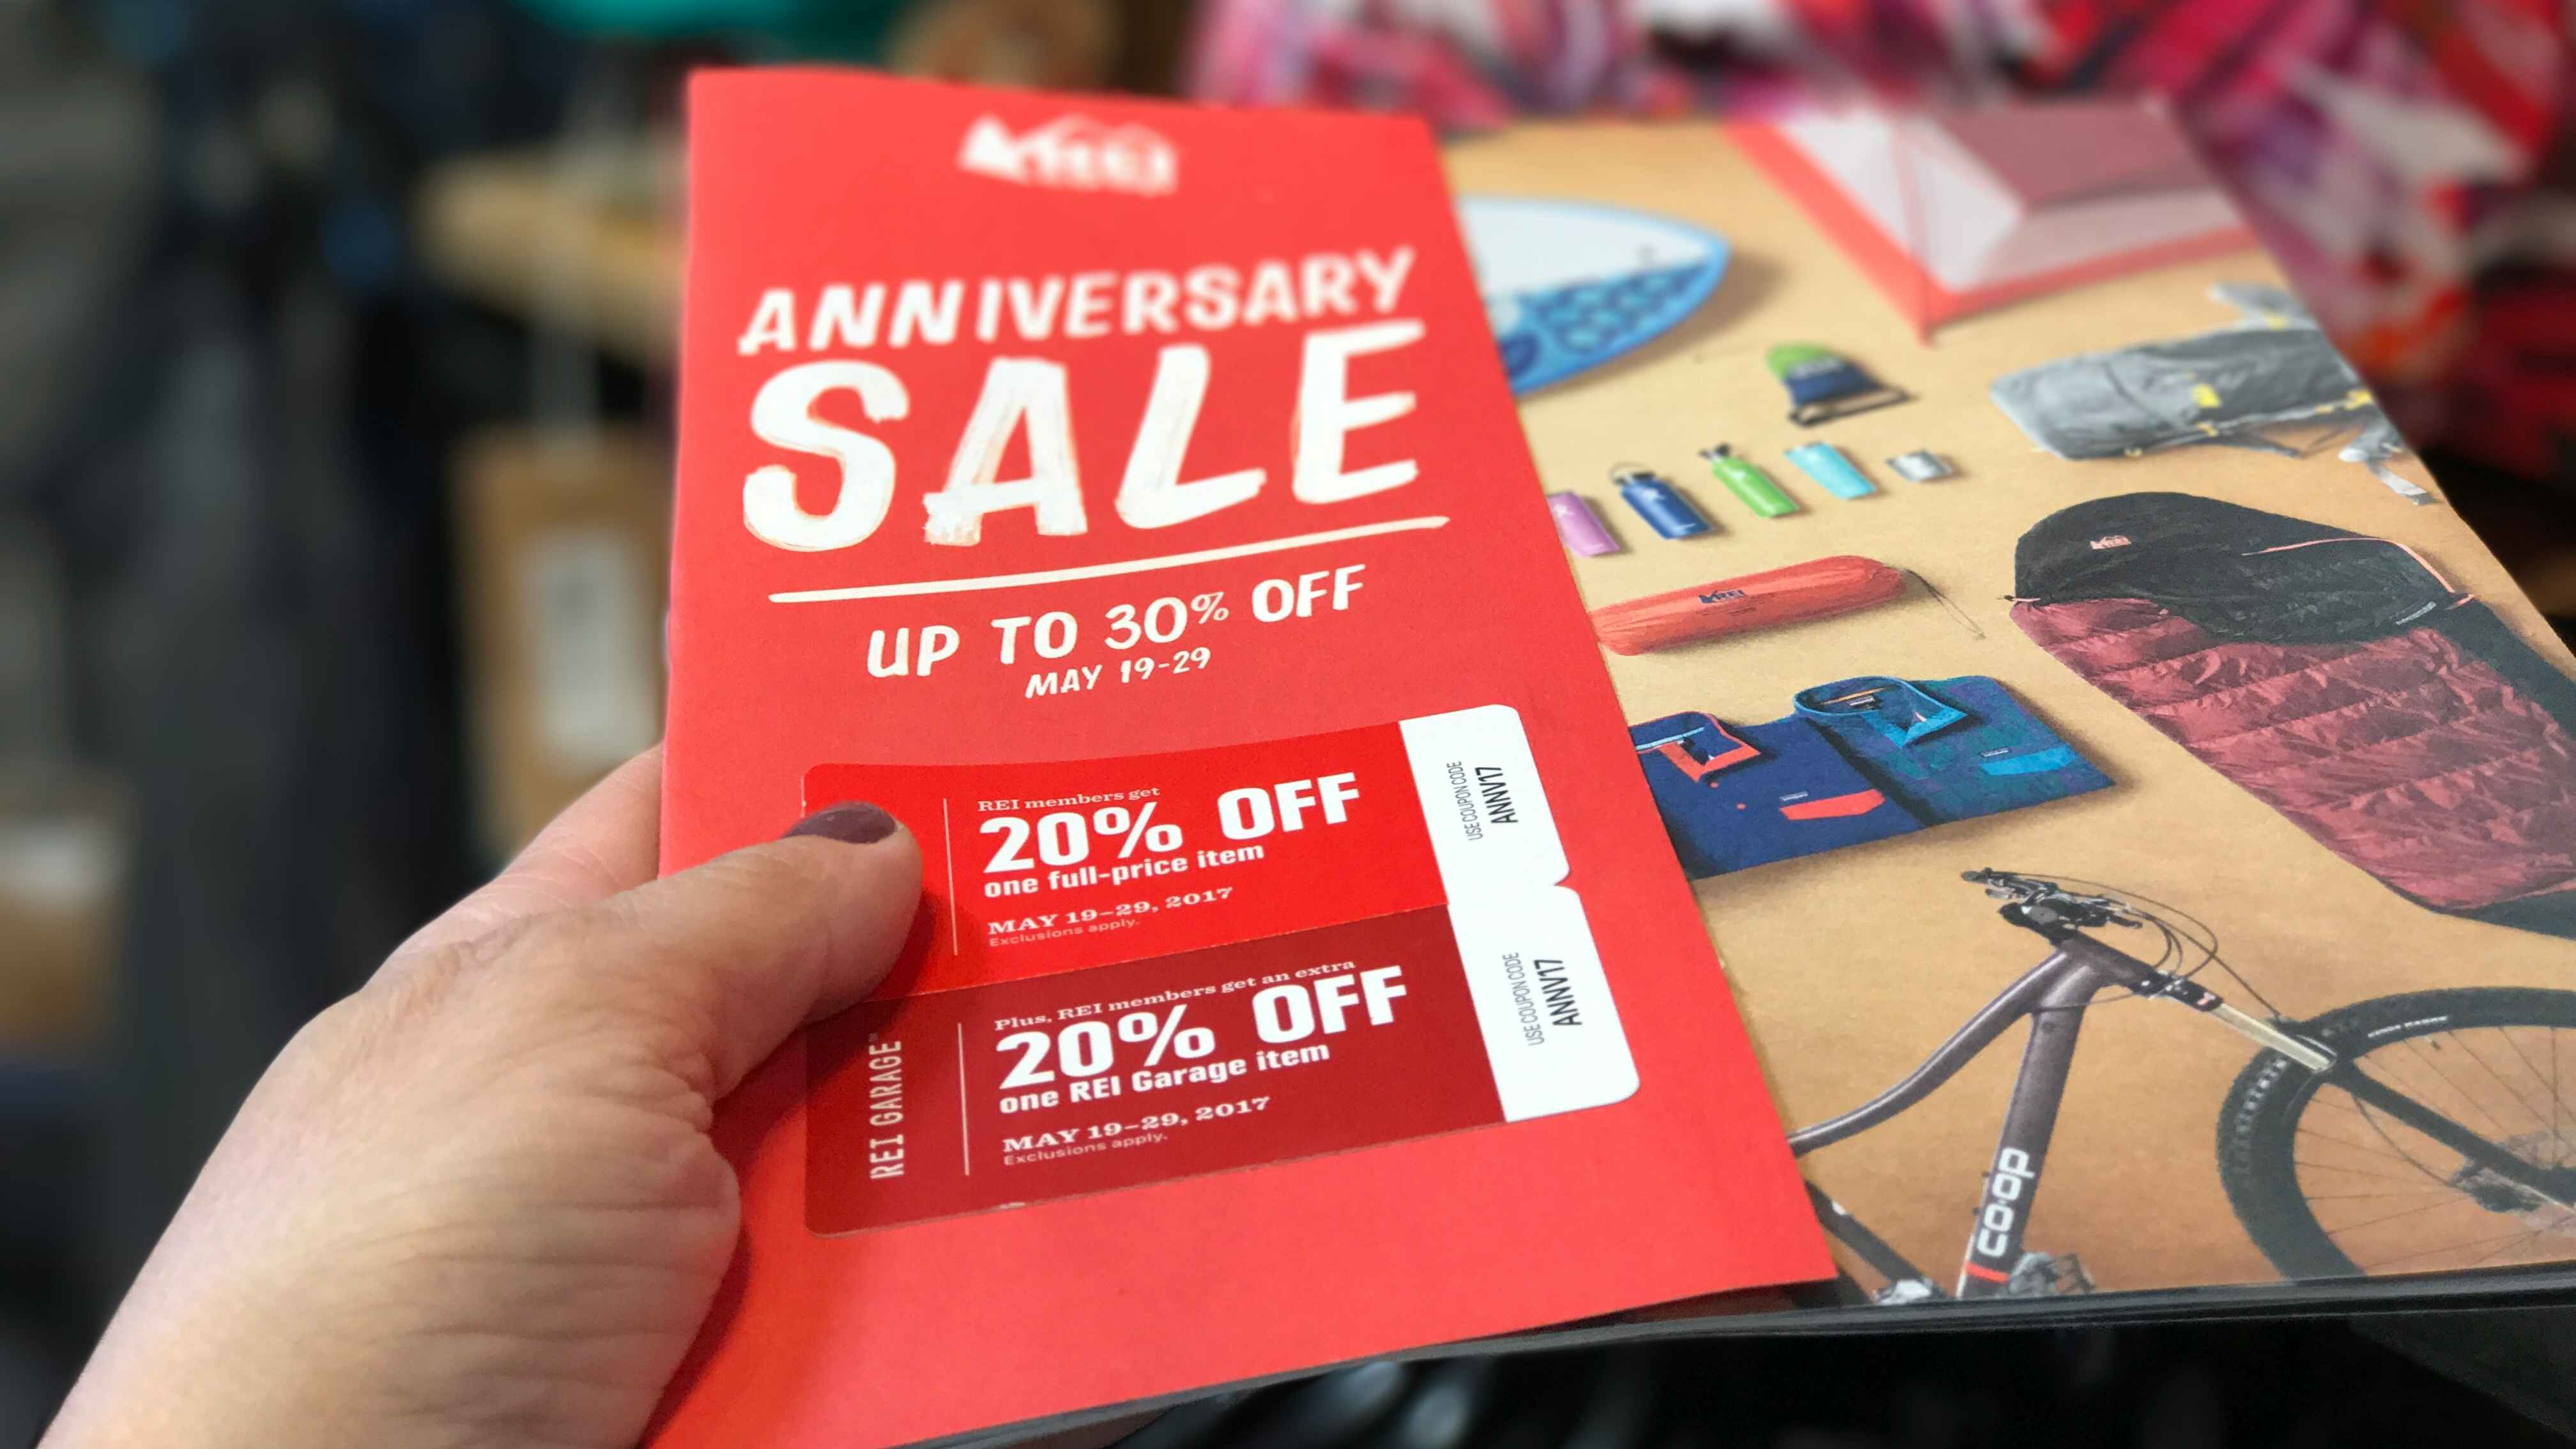 A person's hand holding up some REI Anniversary Sale coupons above a REI ad book.